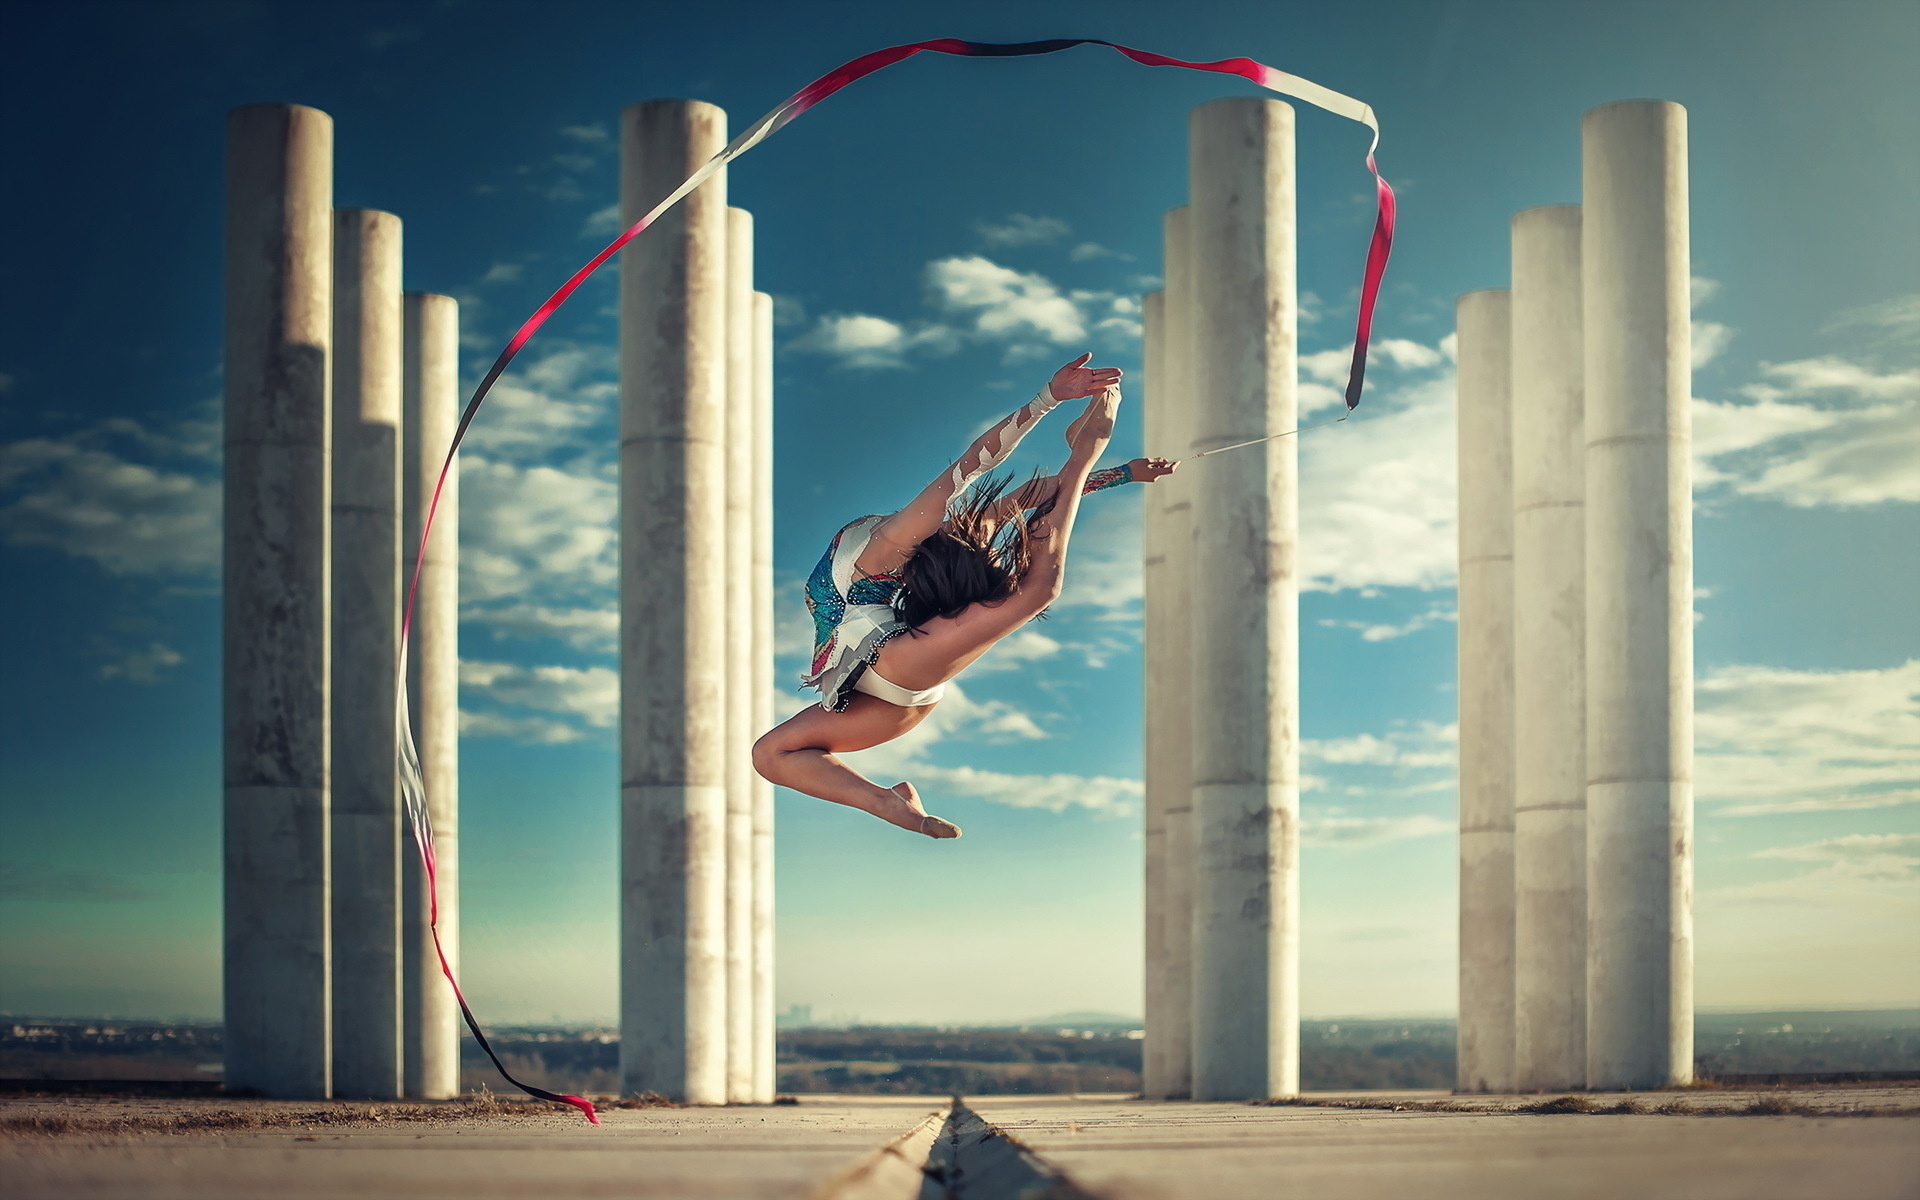 Rhythmic Gymnastics: Jumping tricks with a ribbon, Sports choreography in the street, Outdoor activity. 1920x1200 HD Background.